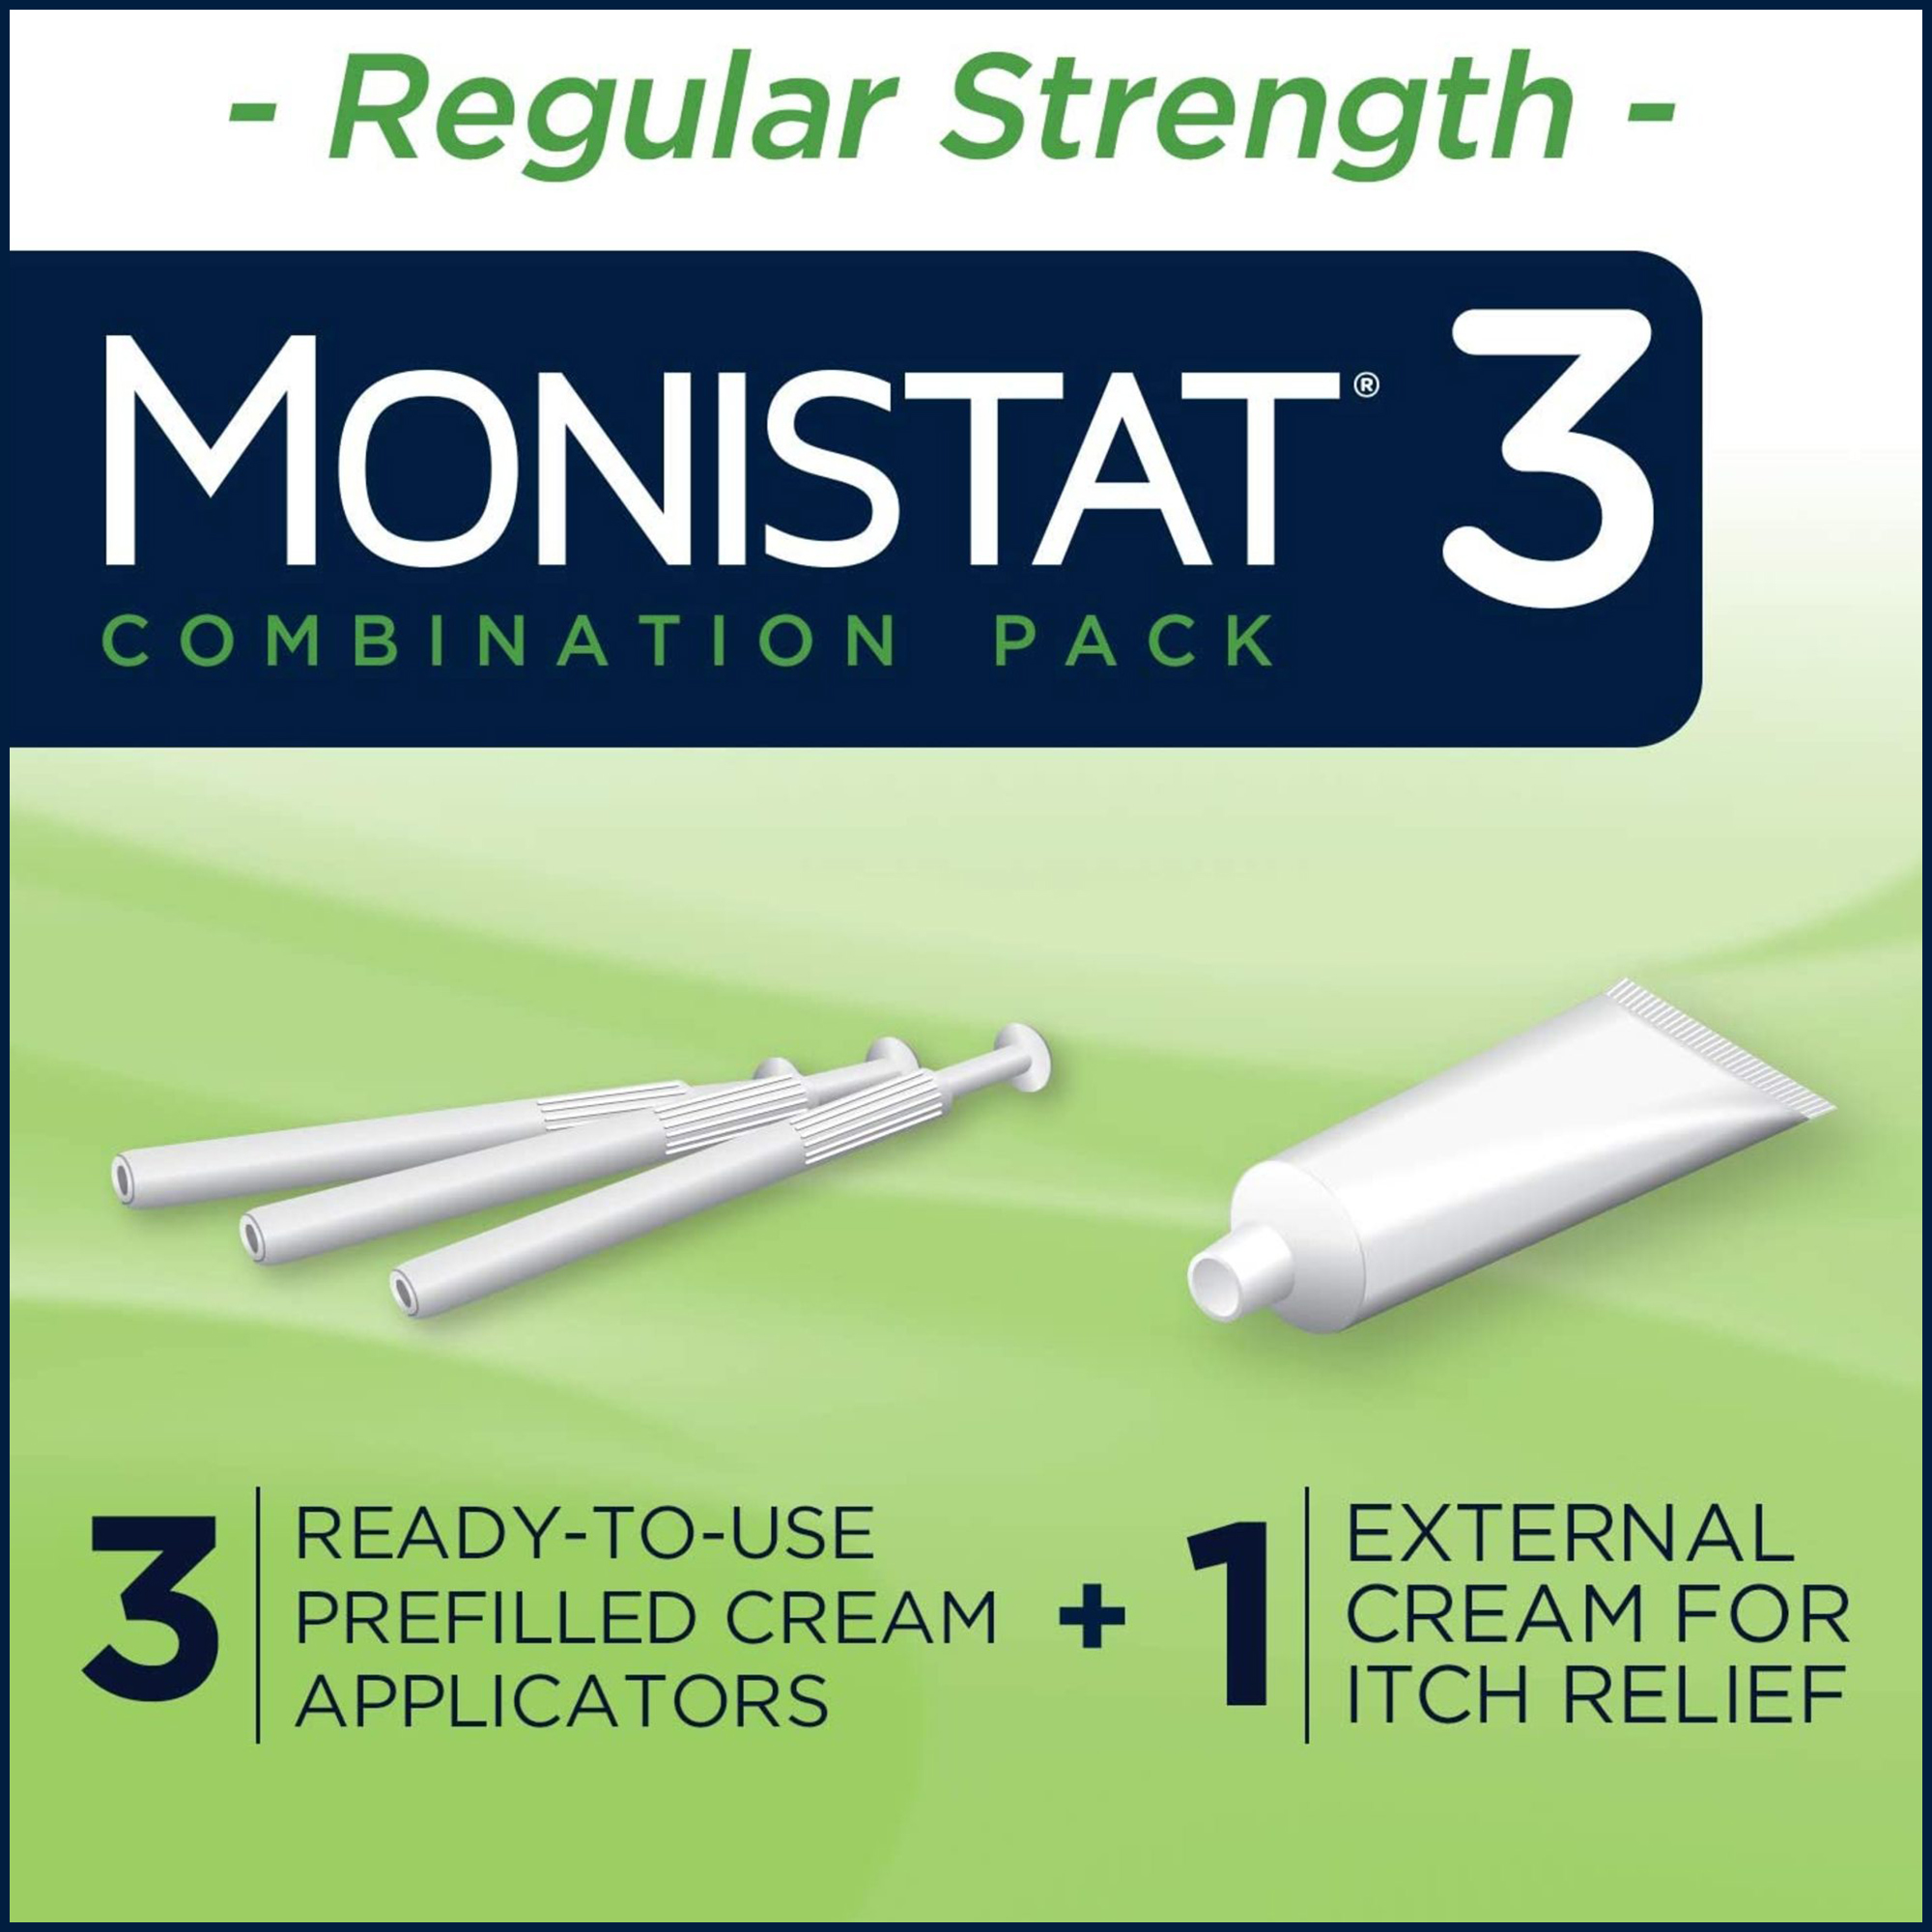 Monistat 3 Day Yeast Infection Treatment, 3 Miconazole Pre-Filled Cream Tubes & External Itch Cream - image 3 of 17